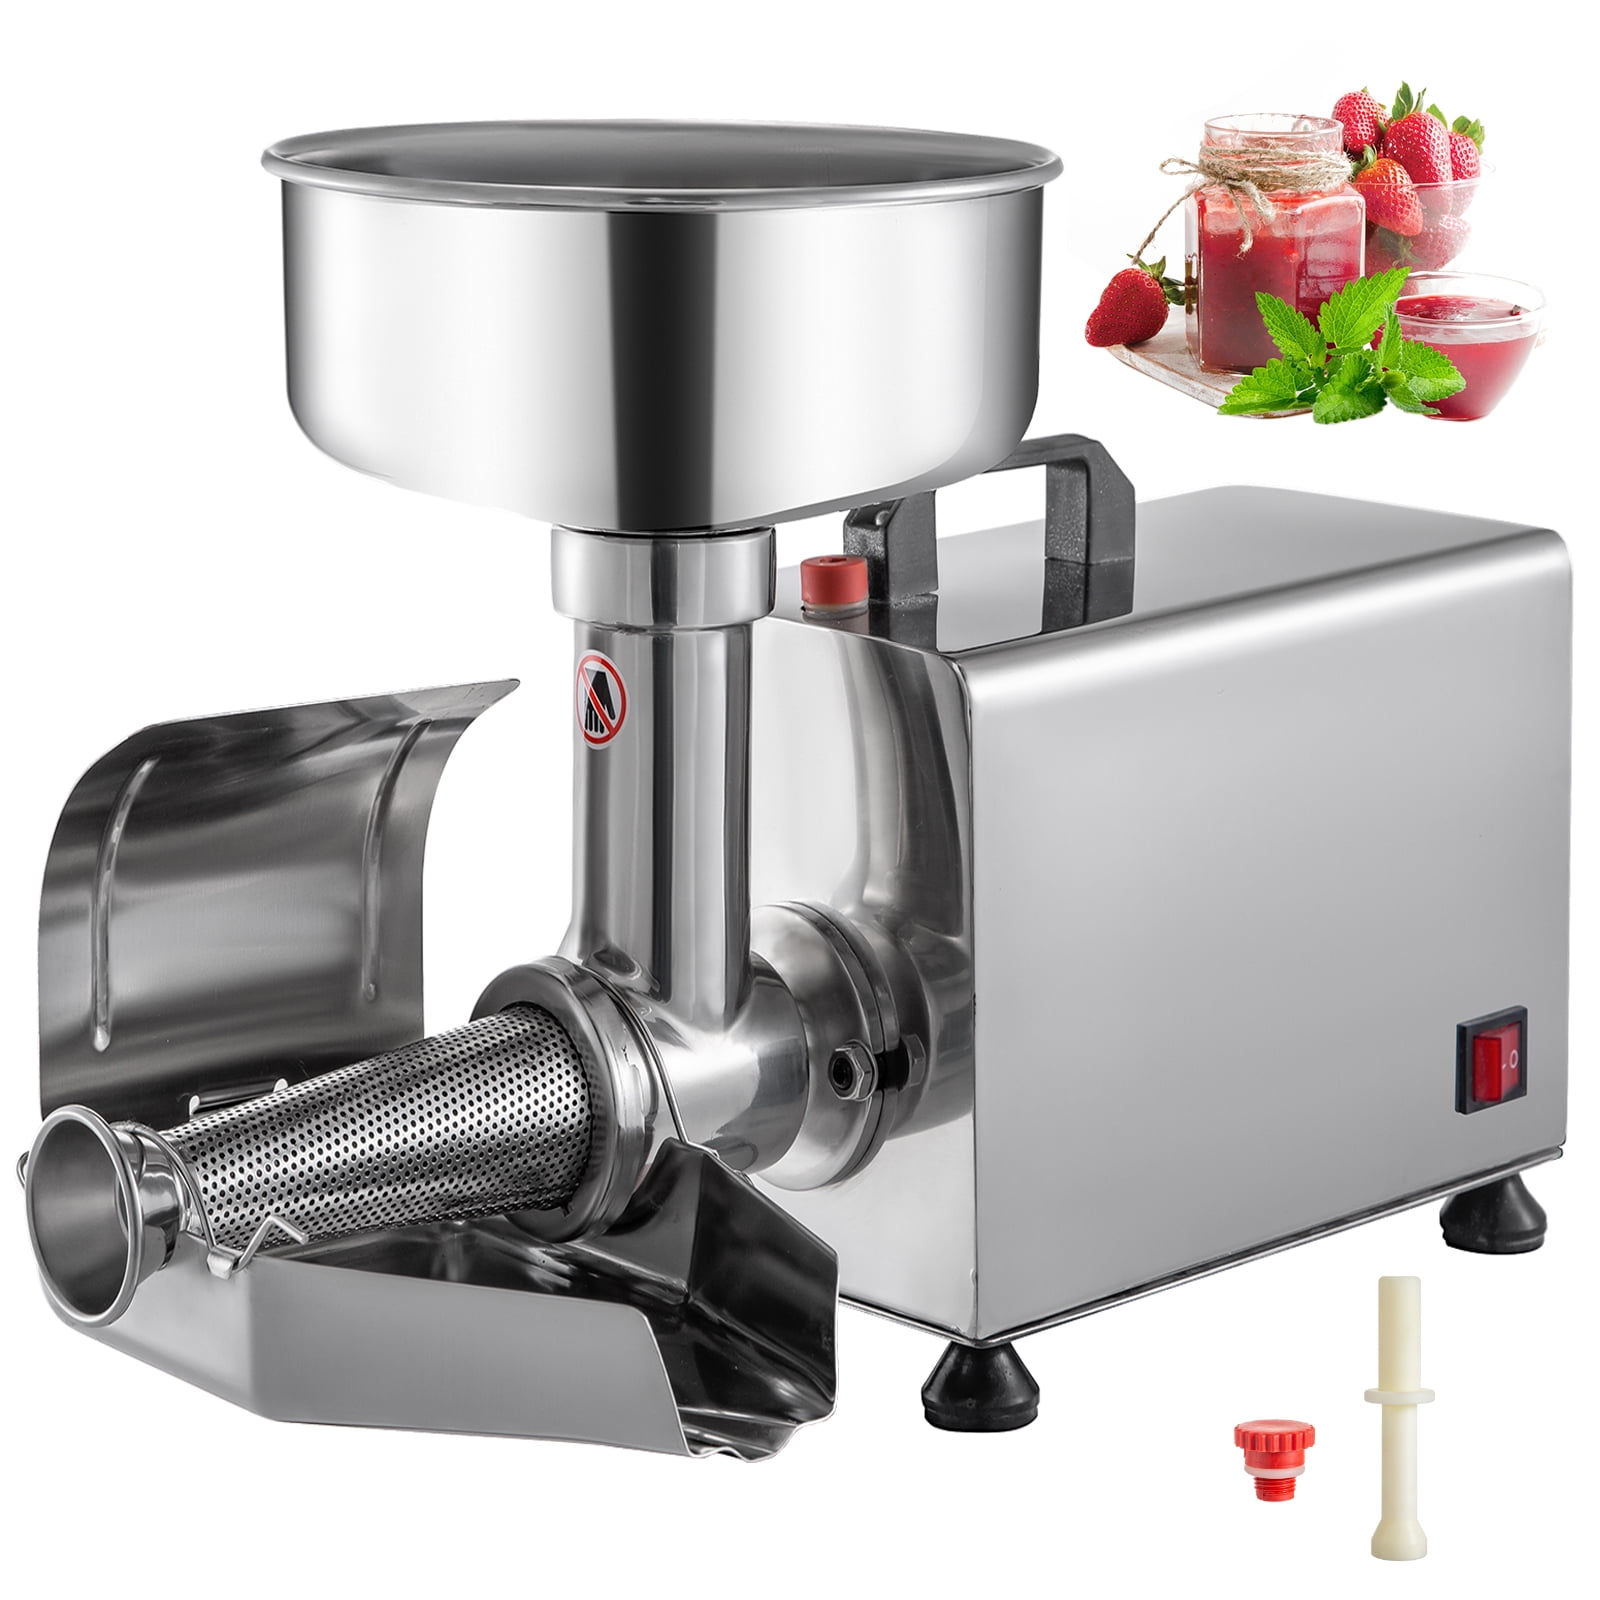 VEVOR Electric Tomato Strainer, 400W Tomato Sauce Maker Machine, 100 LBS/H Food  Strainer and Sauce Maker, Փ45mm Commercial Grade Food Mill with Reverse  Function for Tomato Strawberry Blueberry Sauce